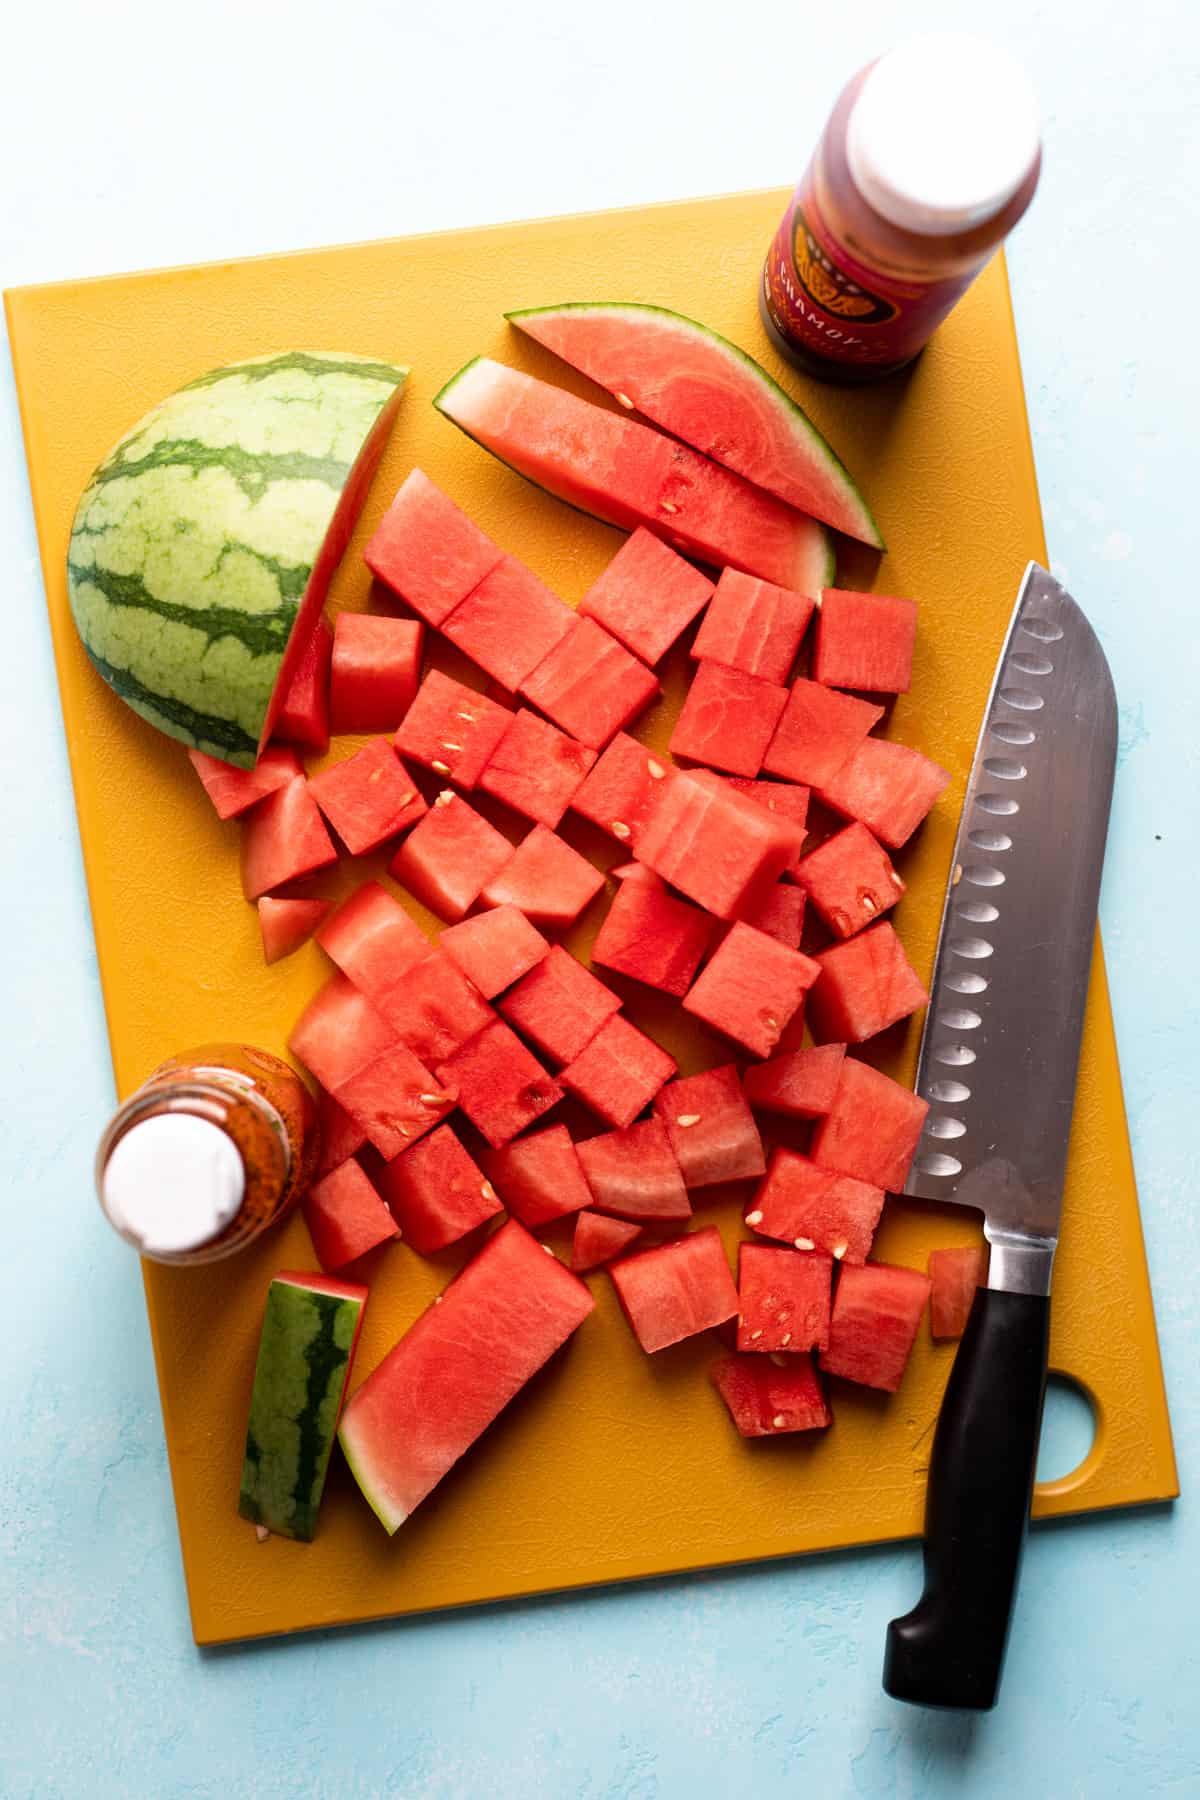 Cutting board with knife and watermelon being cubed.